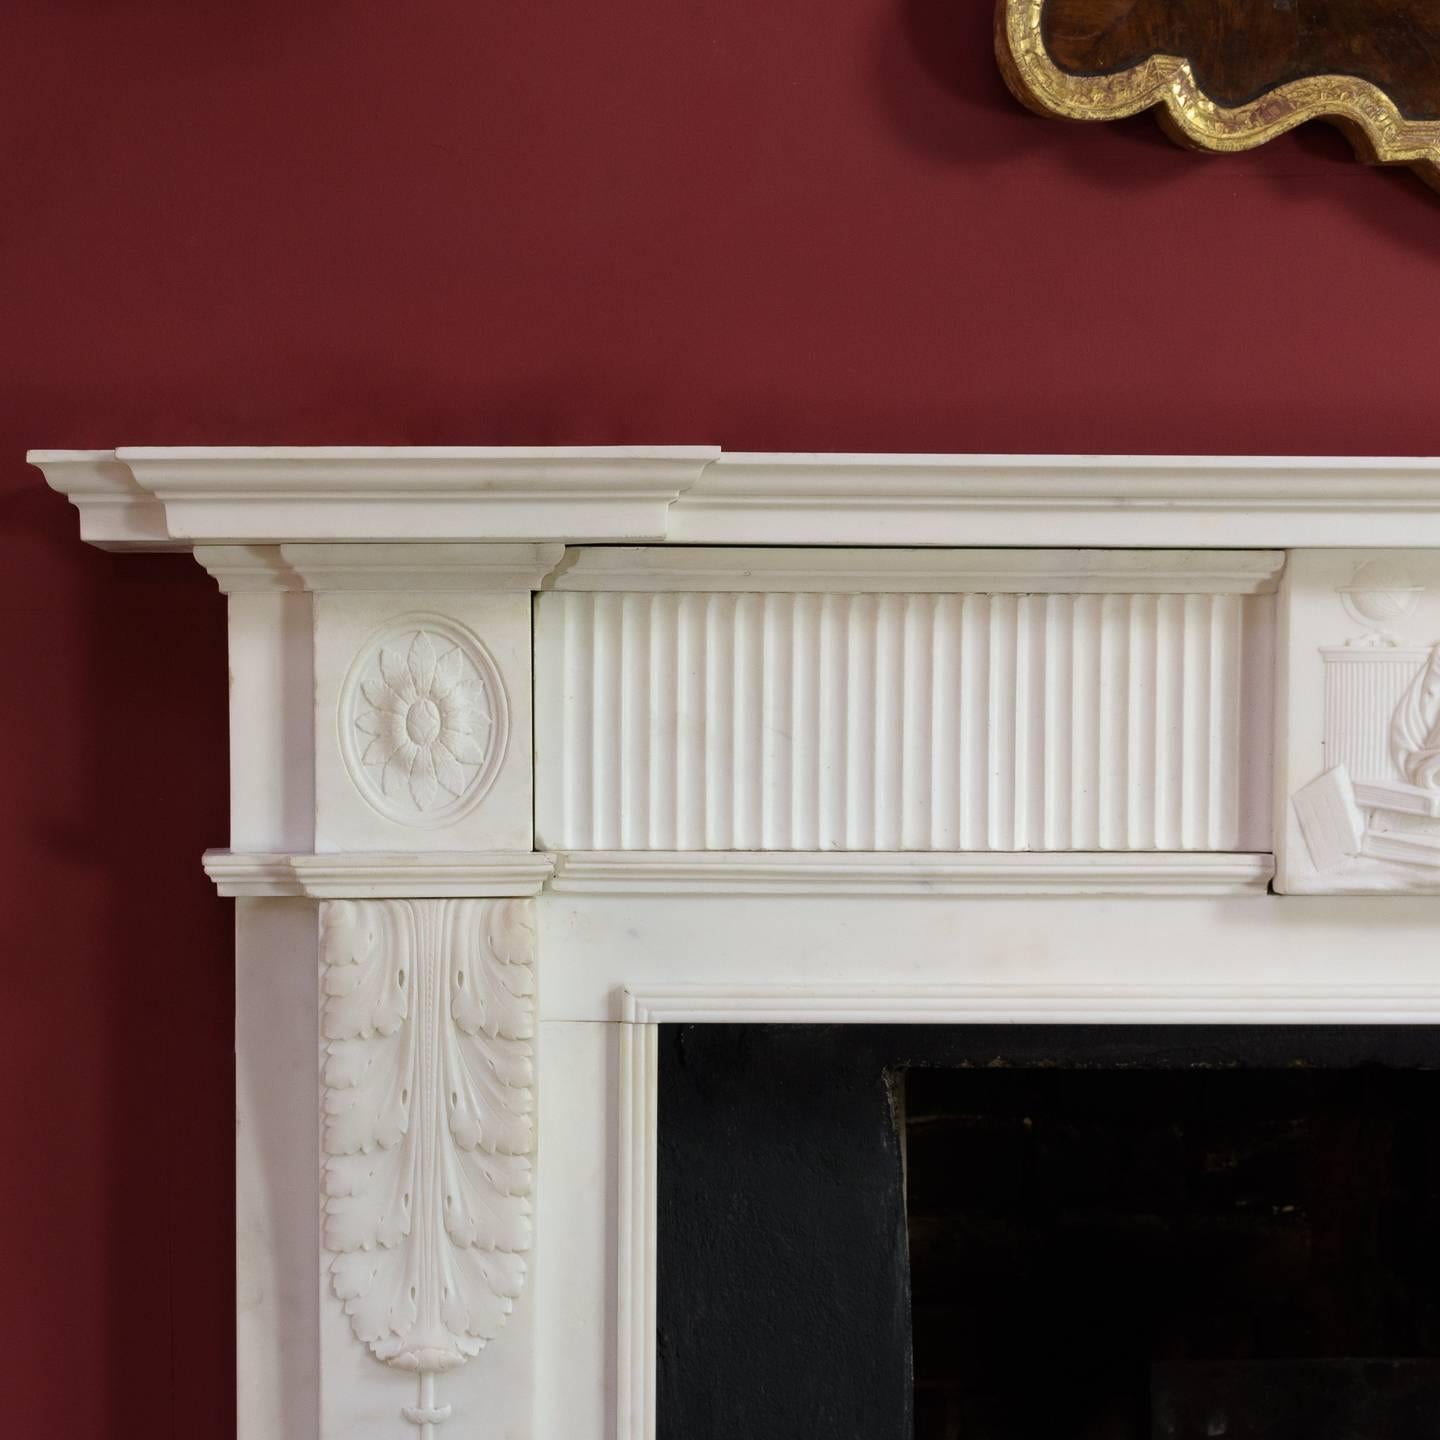 George III statuary marble chimneypiece, circa 1780, the inverse breakfront shelf above fluted frieze flanked by oval paterae end blocks and centered with tablet depicting Urania (Muse of Astronomy), the pilaster jambs with acanthus volutes hung